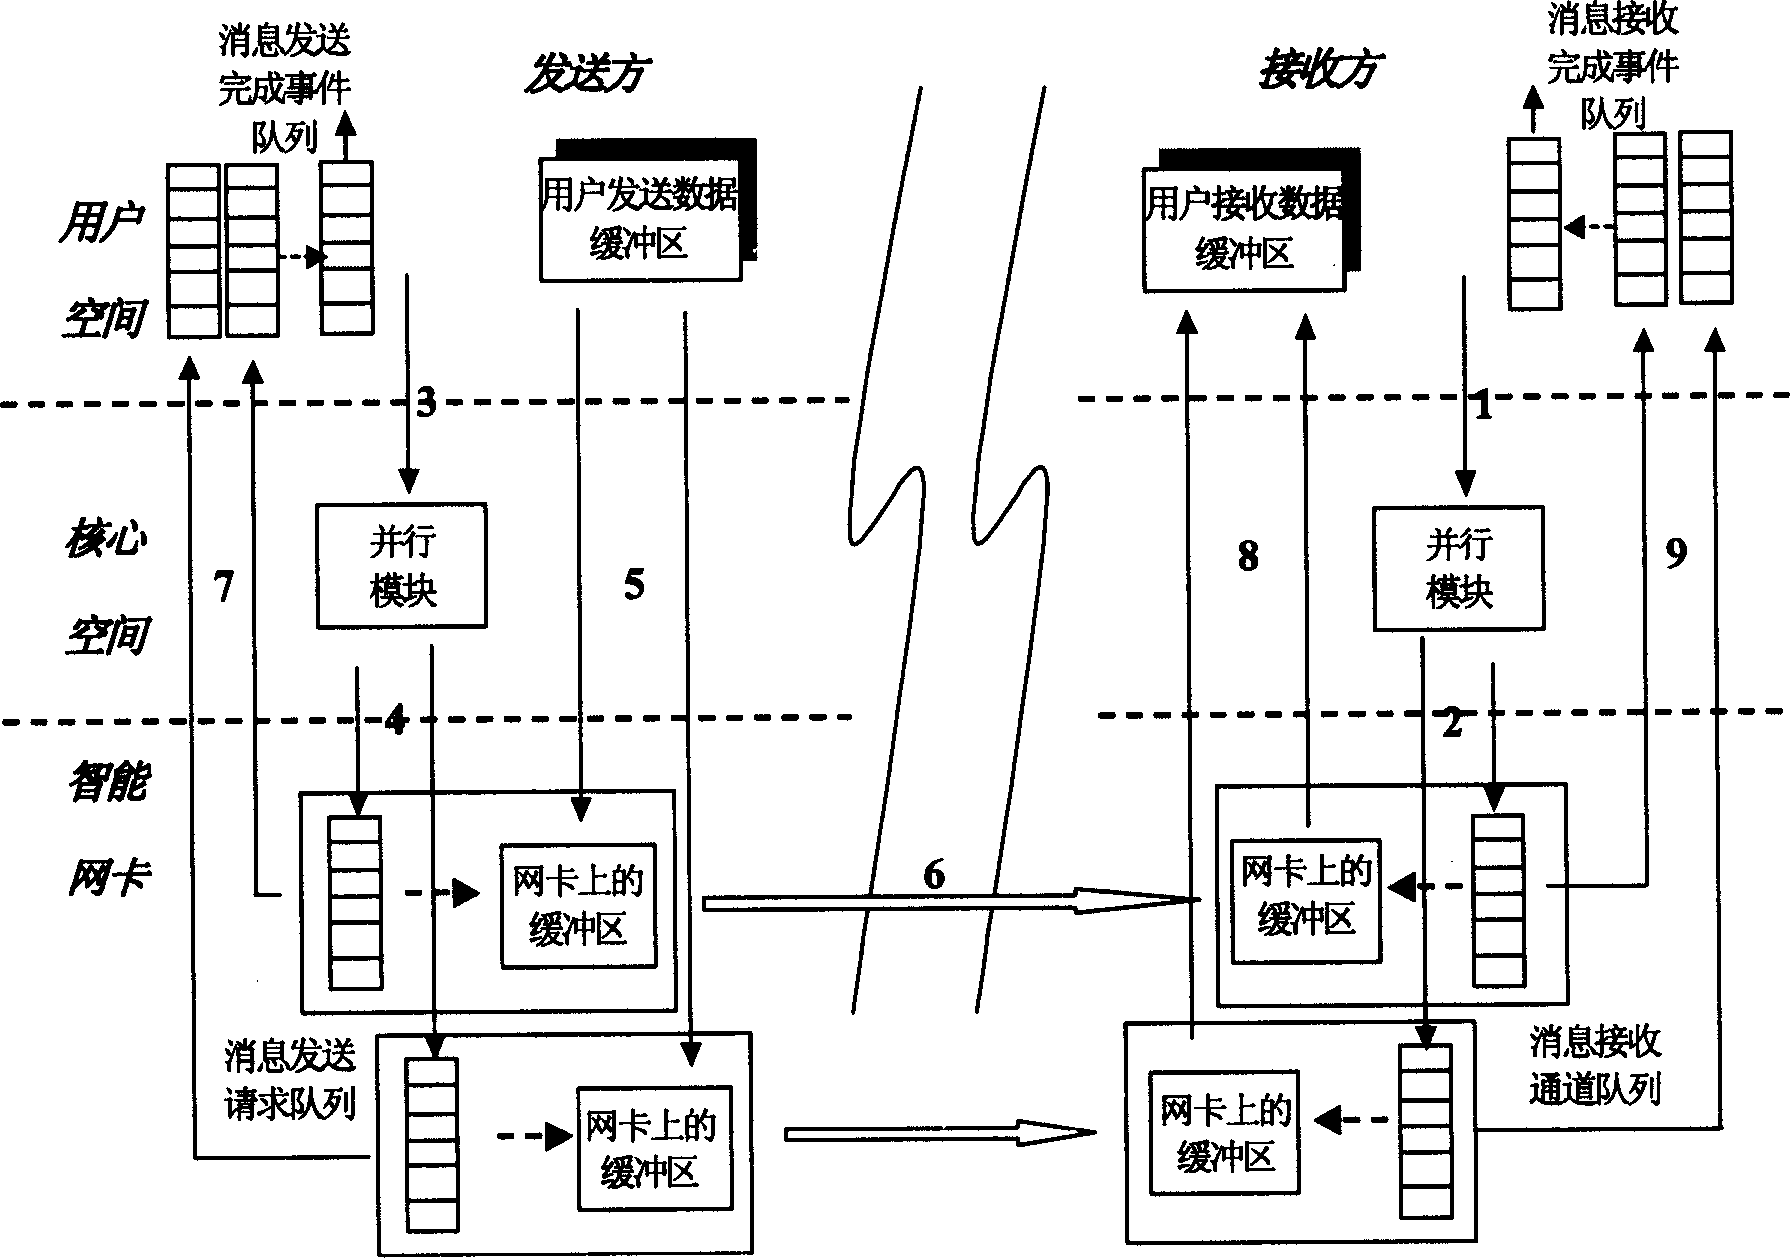 Method of user level parallel communication between computers based on intelligent network card